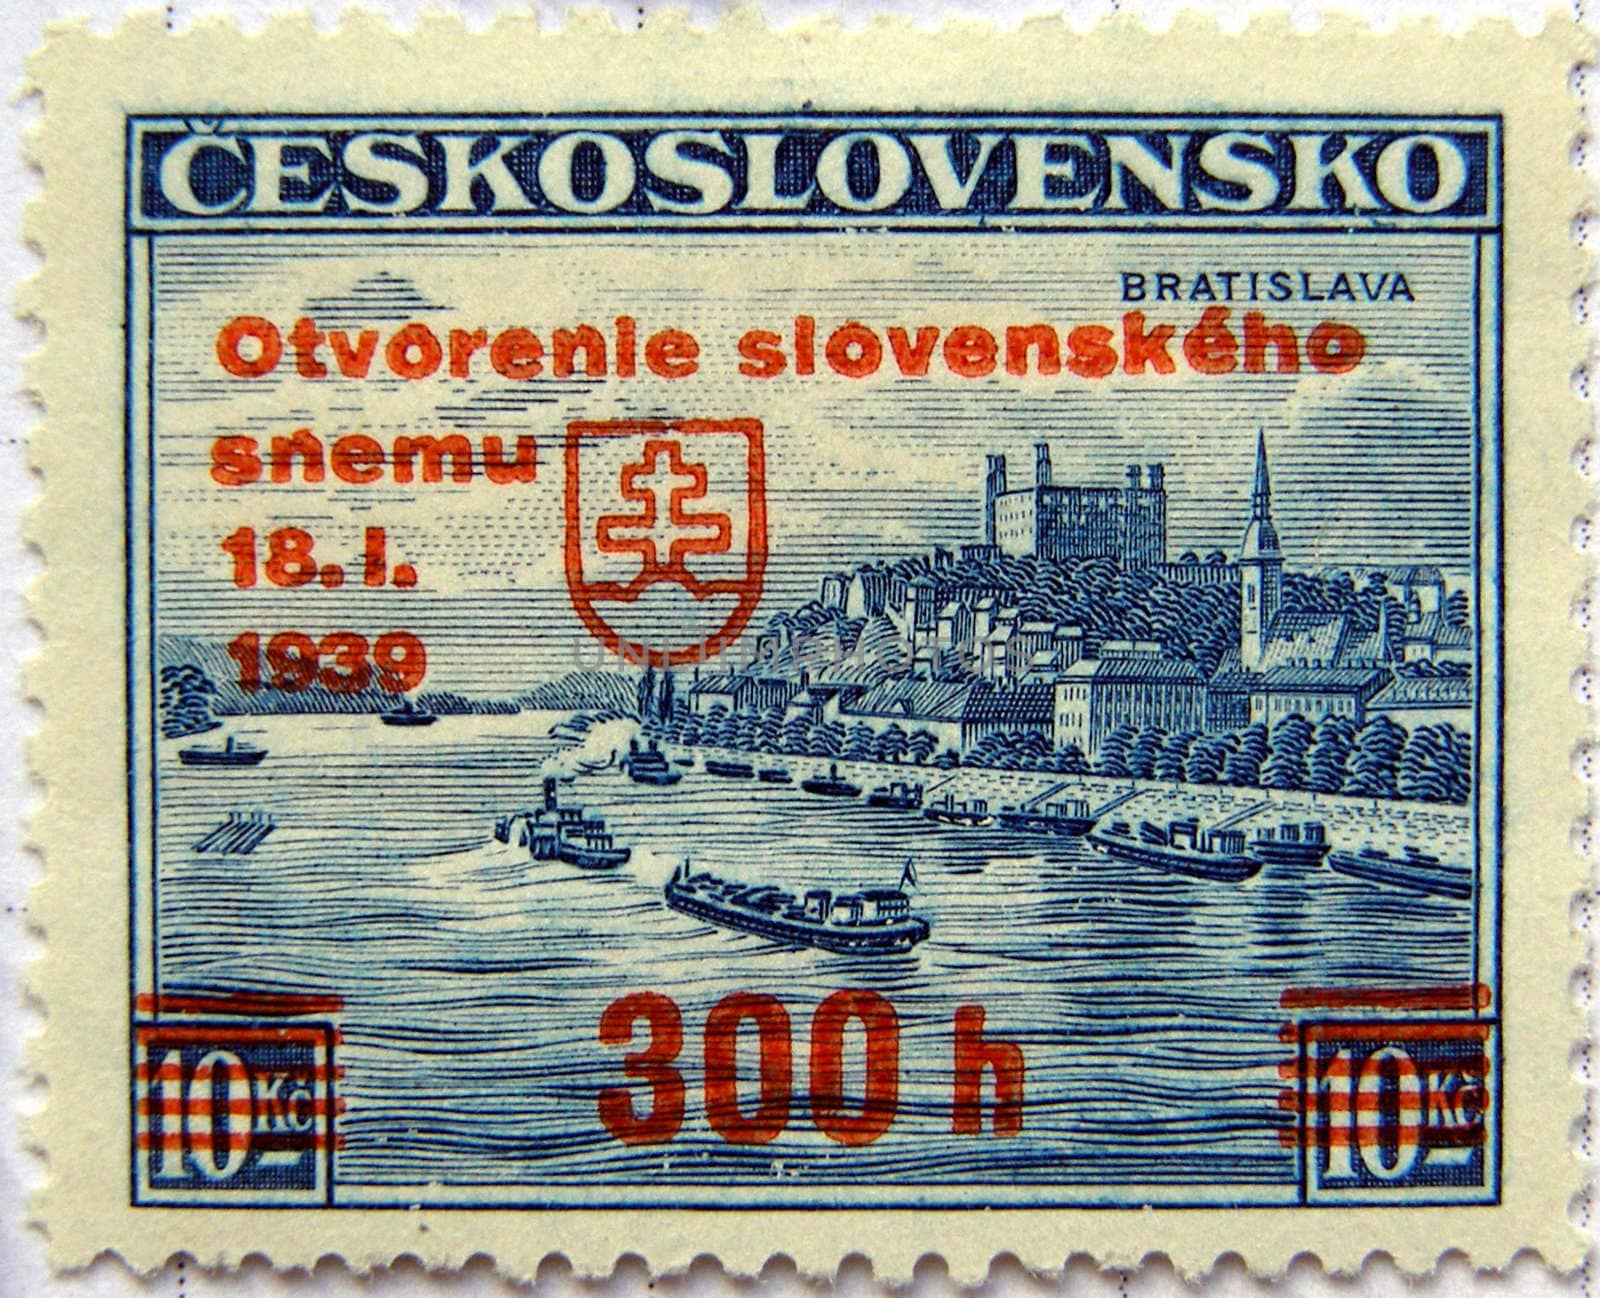 Czechoslovakian Republic mail postage stamp with Slovak independent Republic (January 1939) red ink label printed over it - very rare stamp